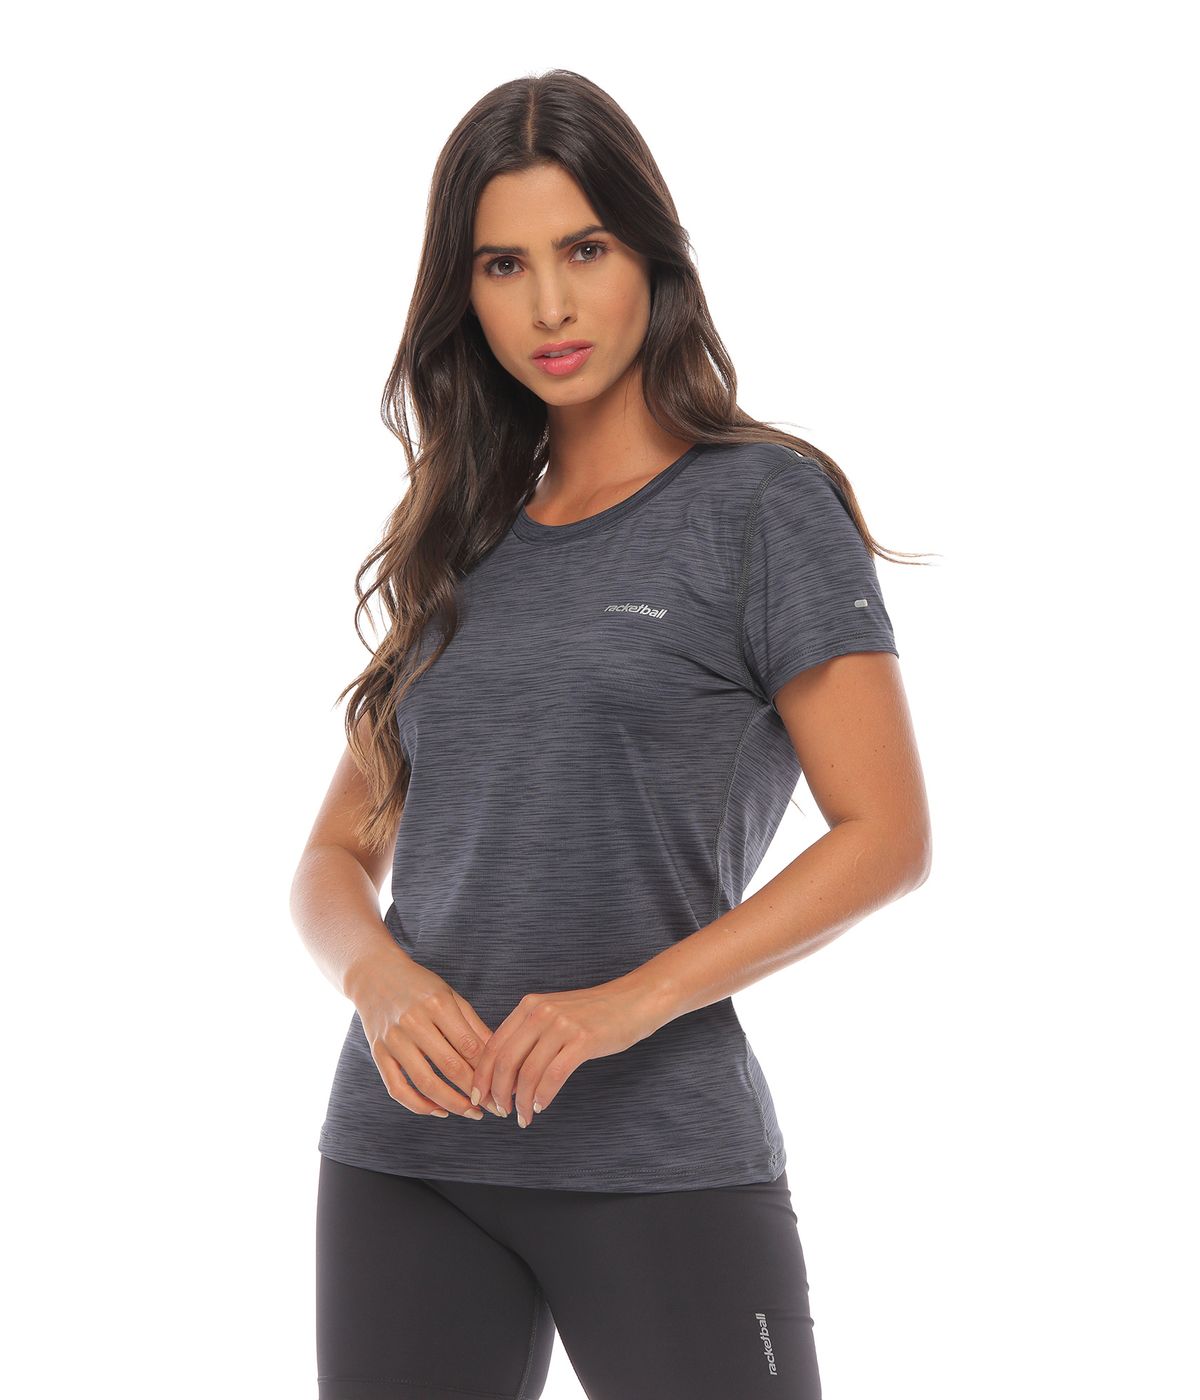 Licra deportiva para mujer, color gris - racketball movil